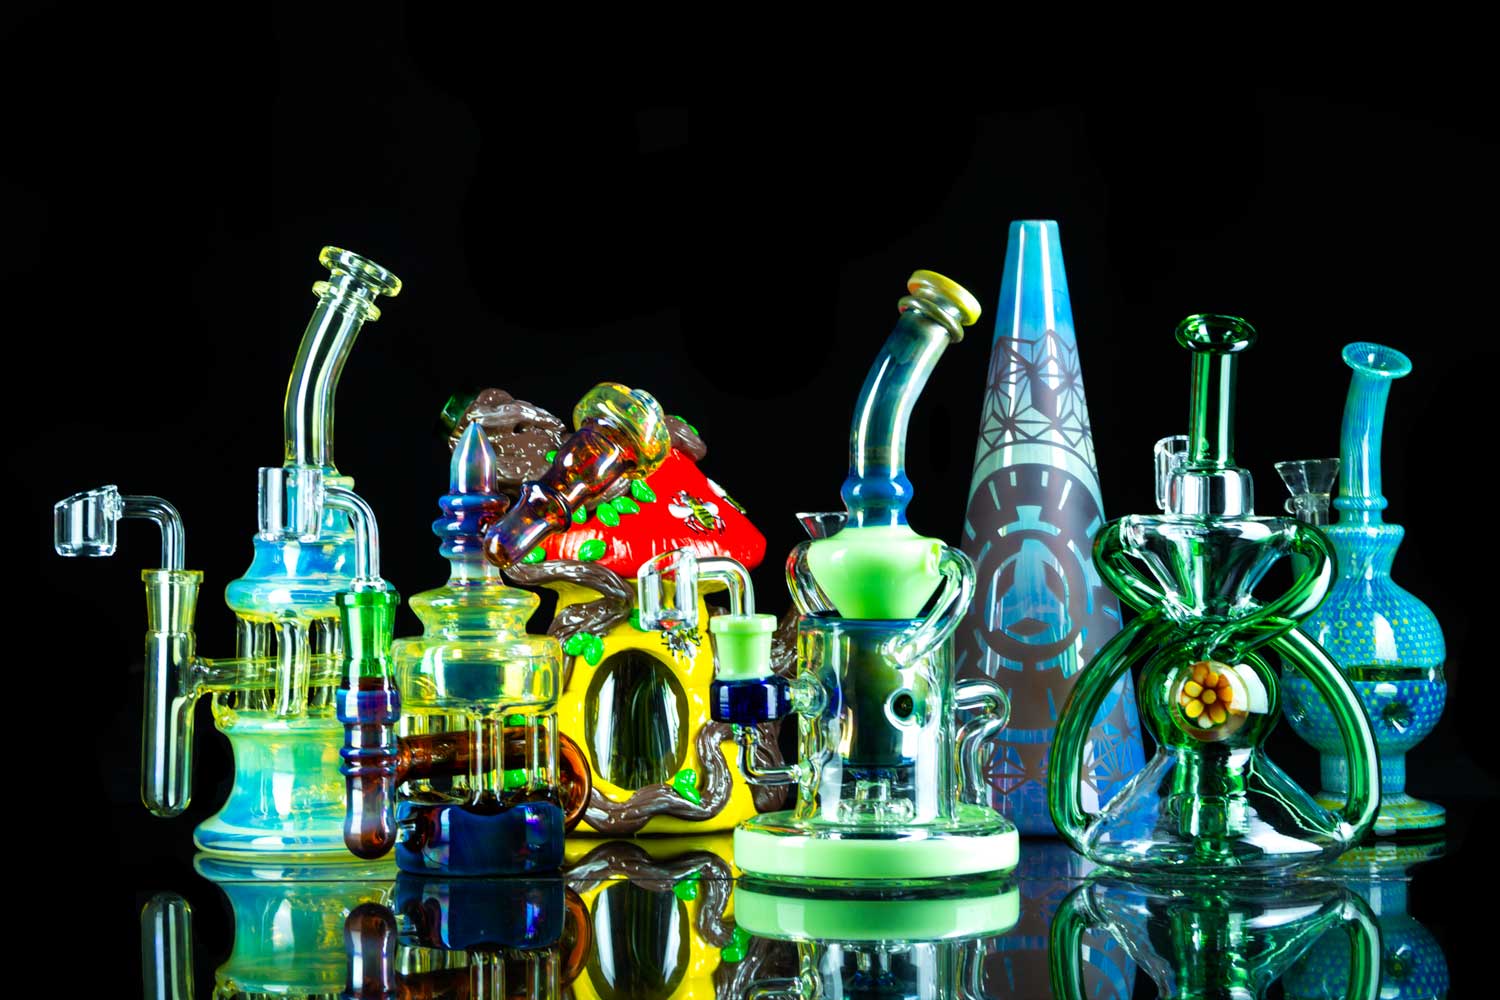 Heady glass for sale on black table